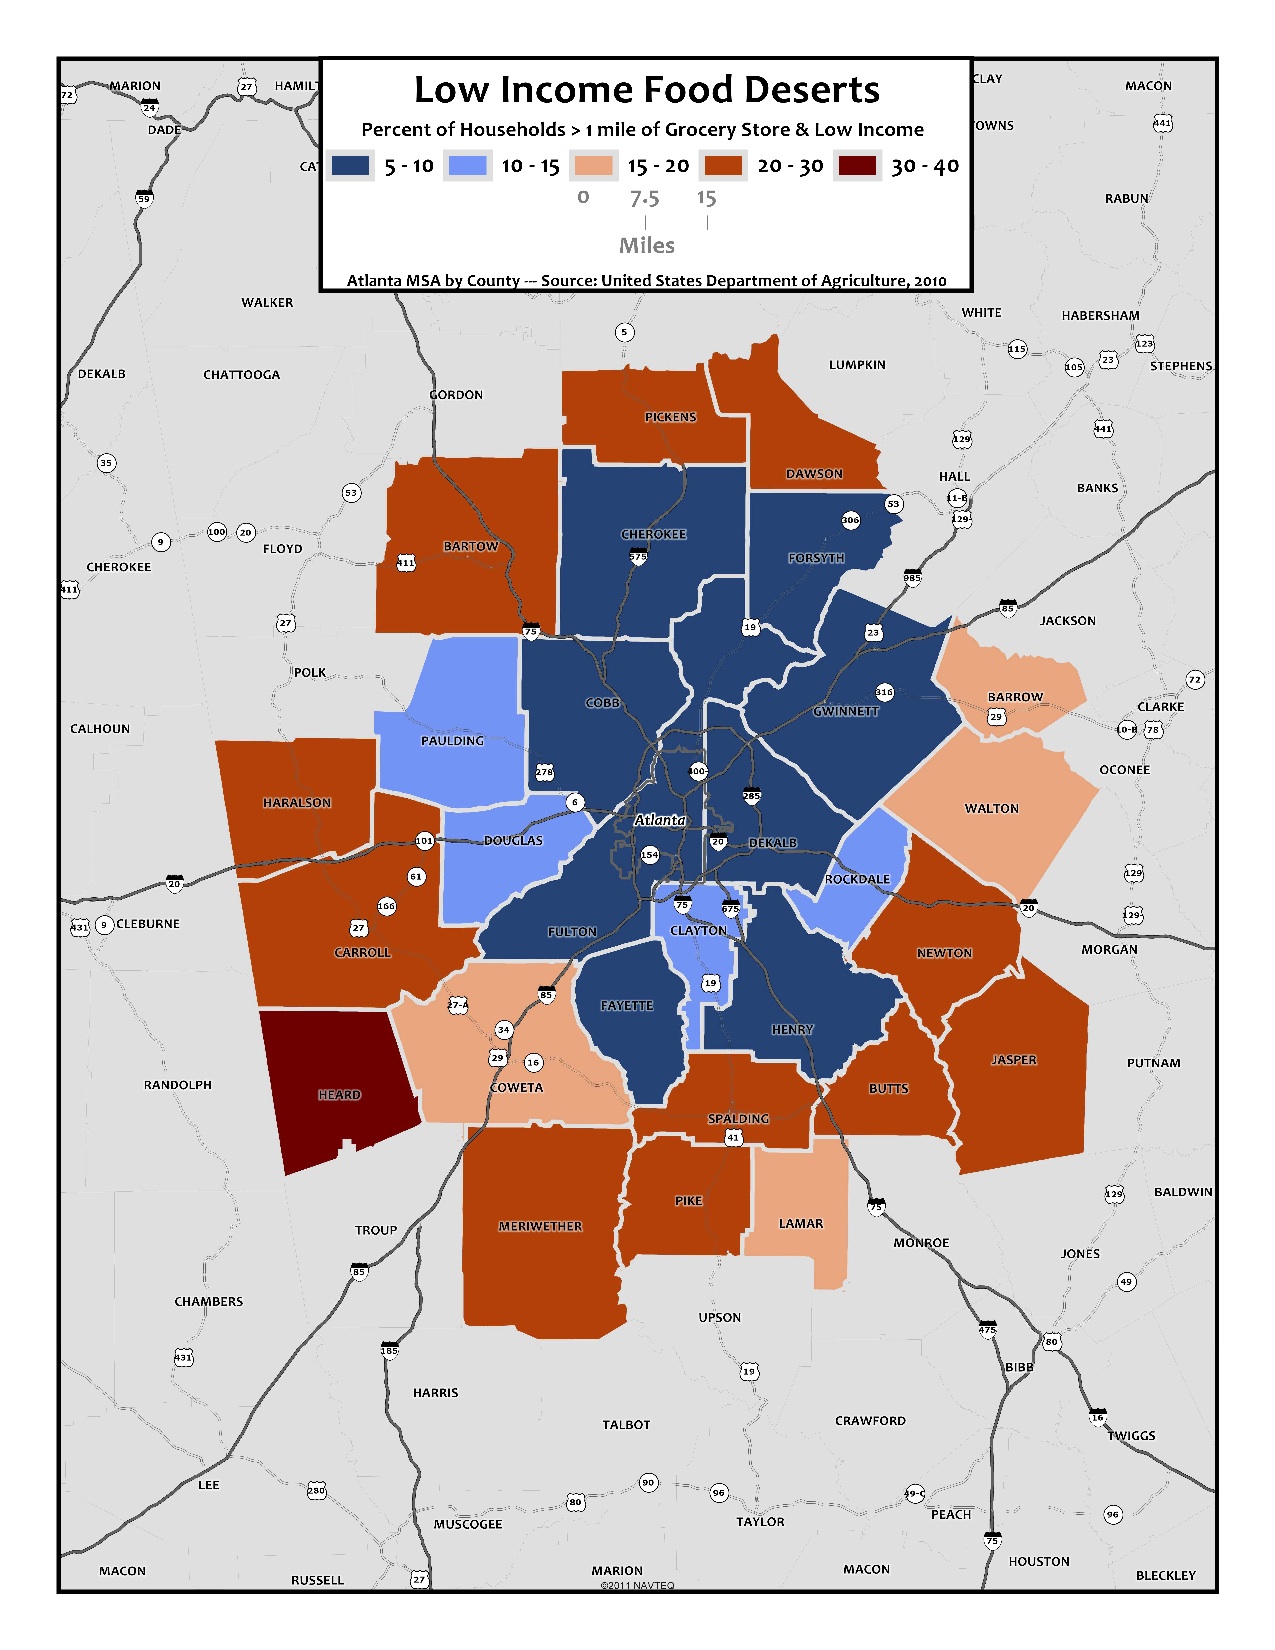 Low Income Food Deserts – metro counties